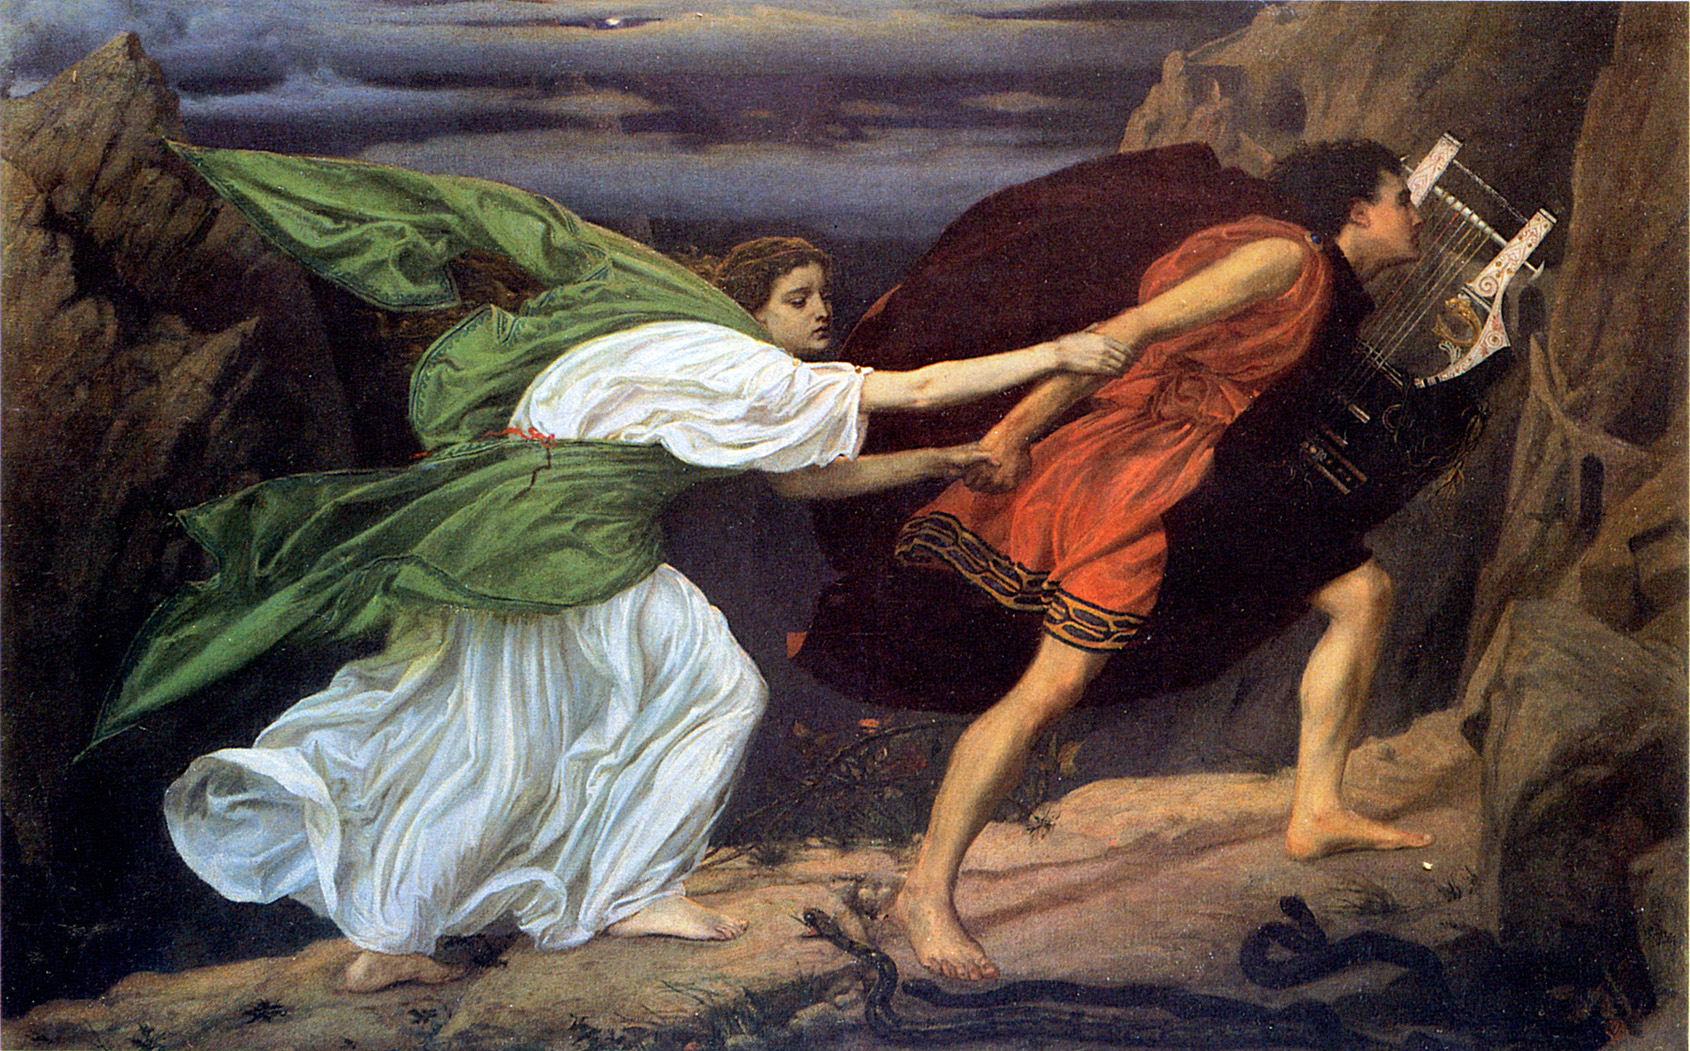 A painting of two people running (to the right of the frame). The person leading is a male, he is holding a harp and wearing a red cloak. The second person is a woman who is being strung along by the man. She is wearing a white cloak with a green cape. They are on a rocky ledge with snakes.